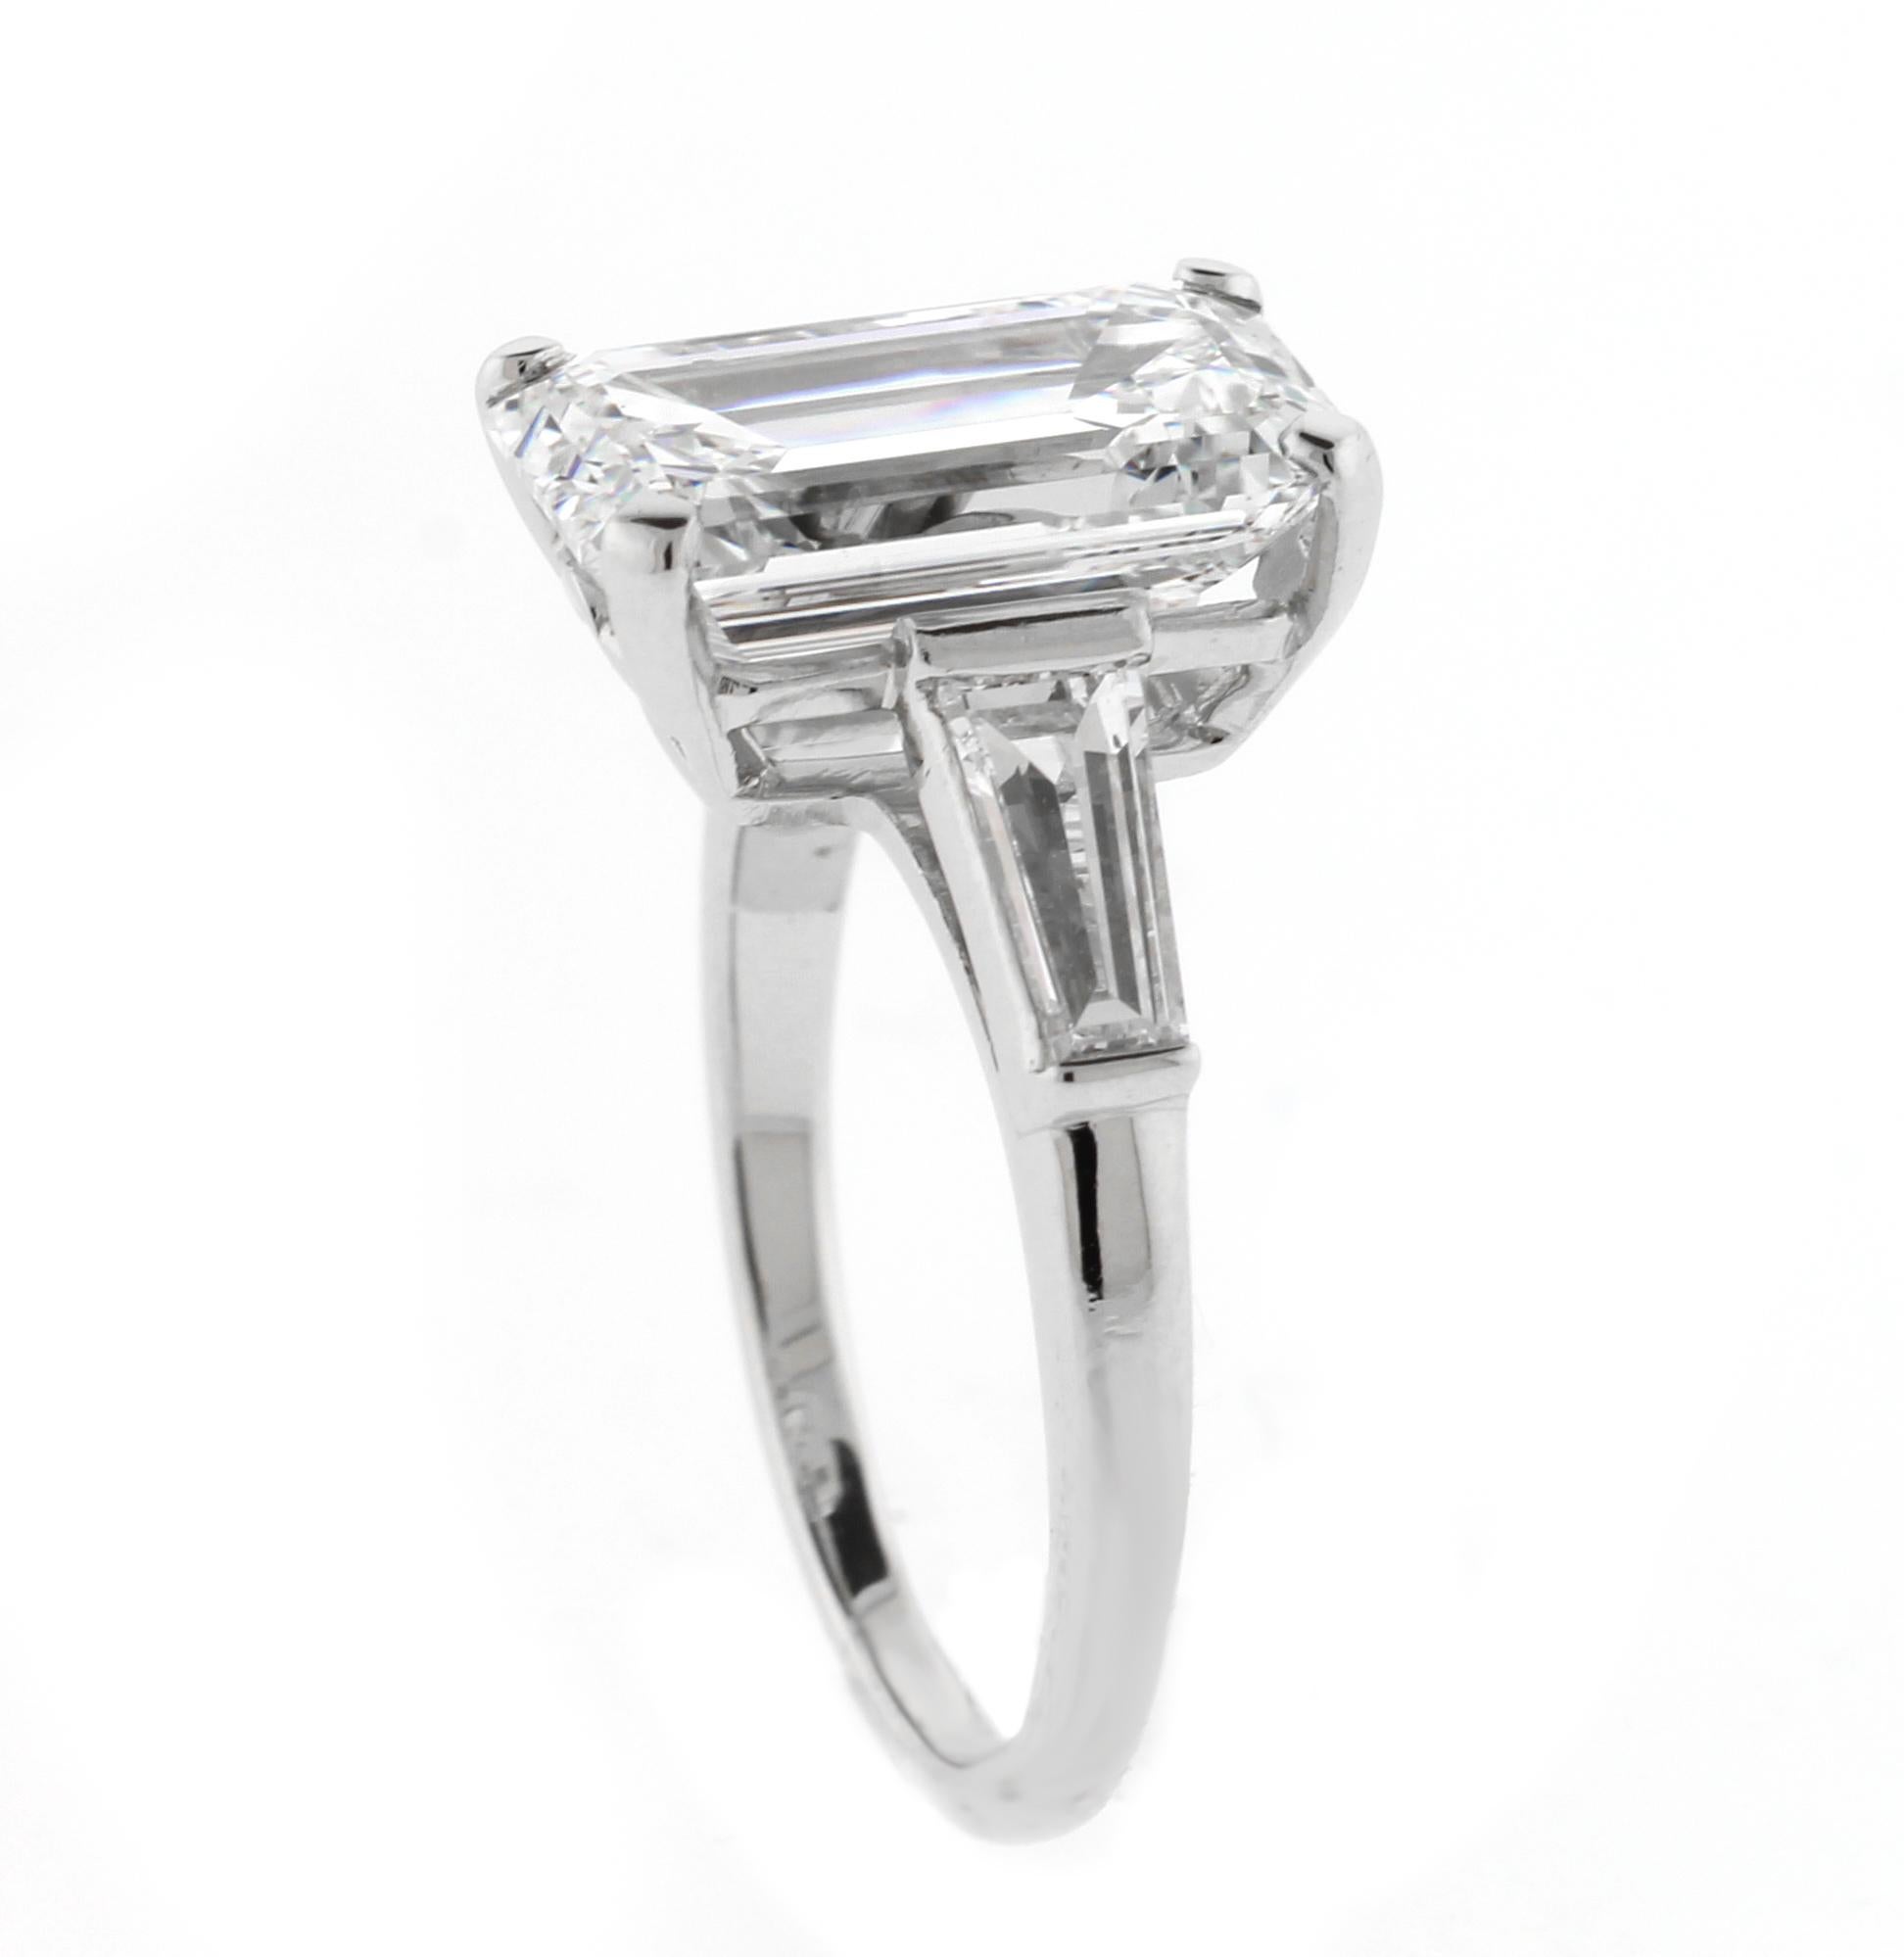 From the master ring makers of Pampillonia Jewelers a 4.39 emerald cut diamond platinum ring. The diamond is H color and VS1 clarity. The shape of the diamond is exceptional with well defined corners and distinct architecture. The two tapered